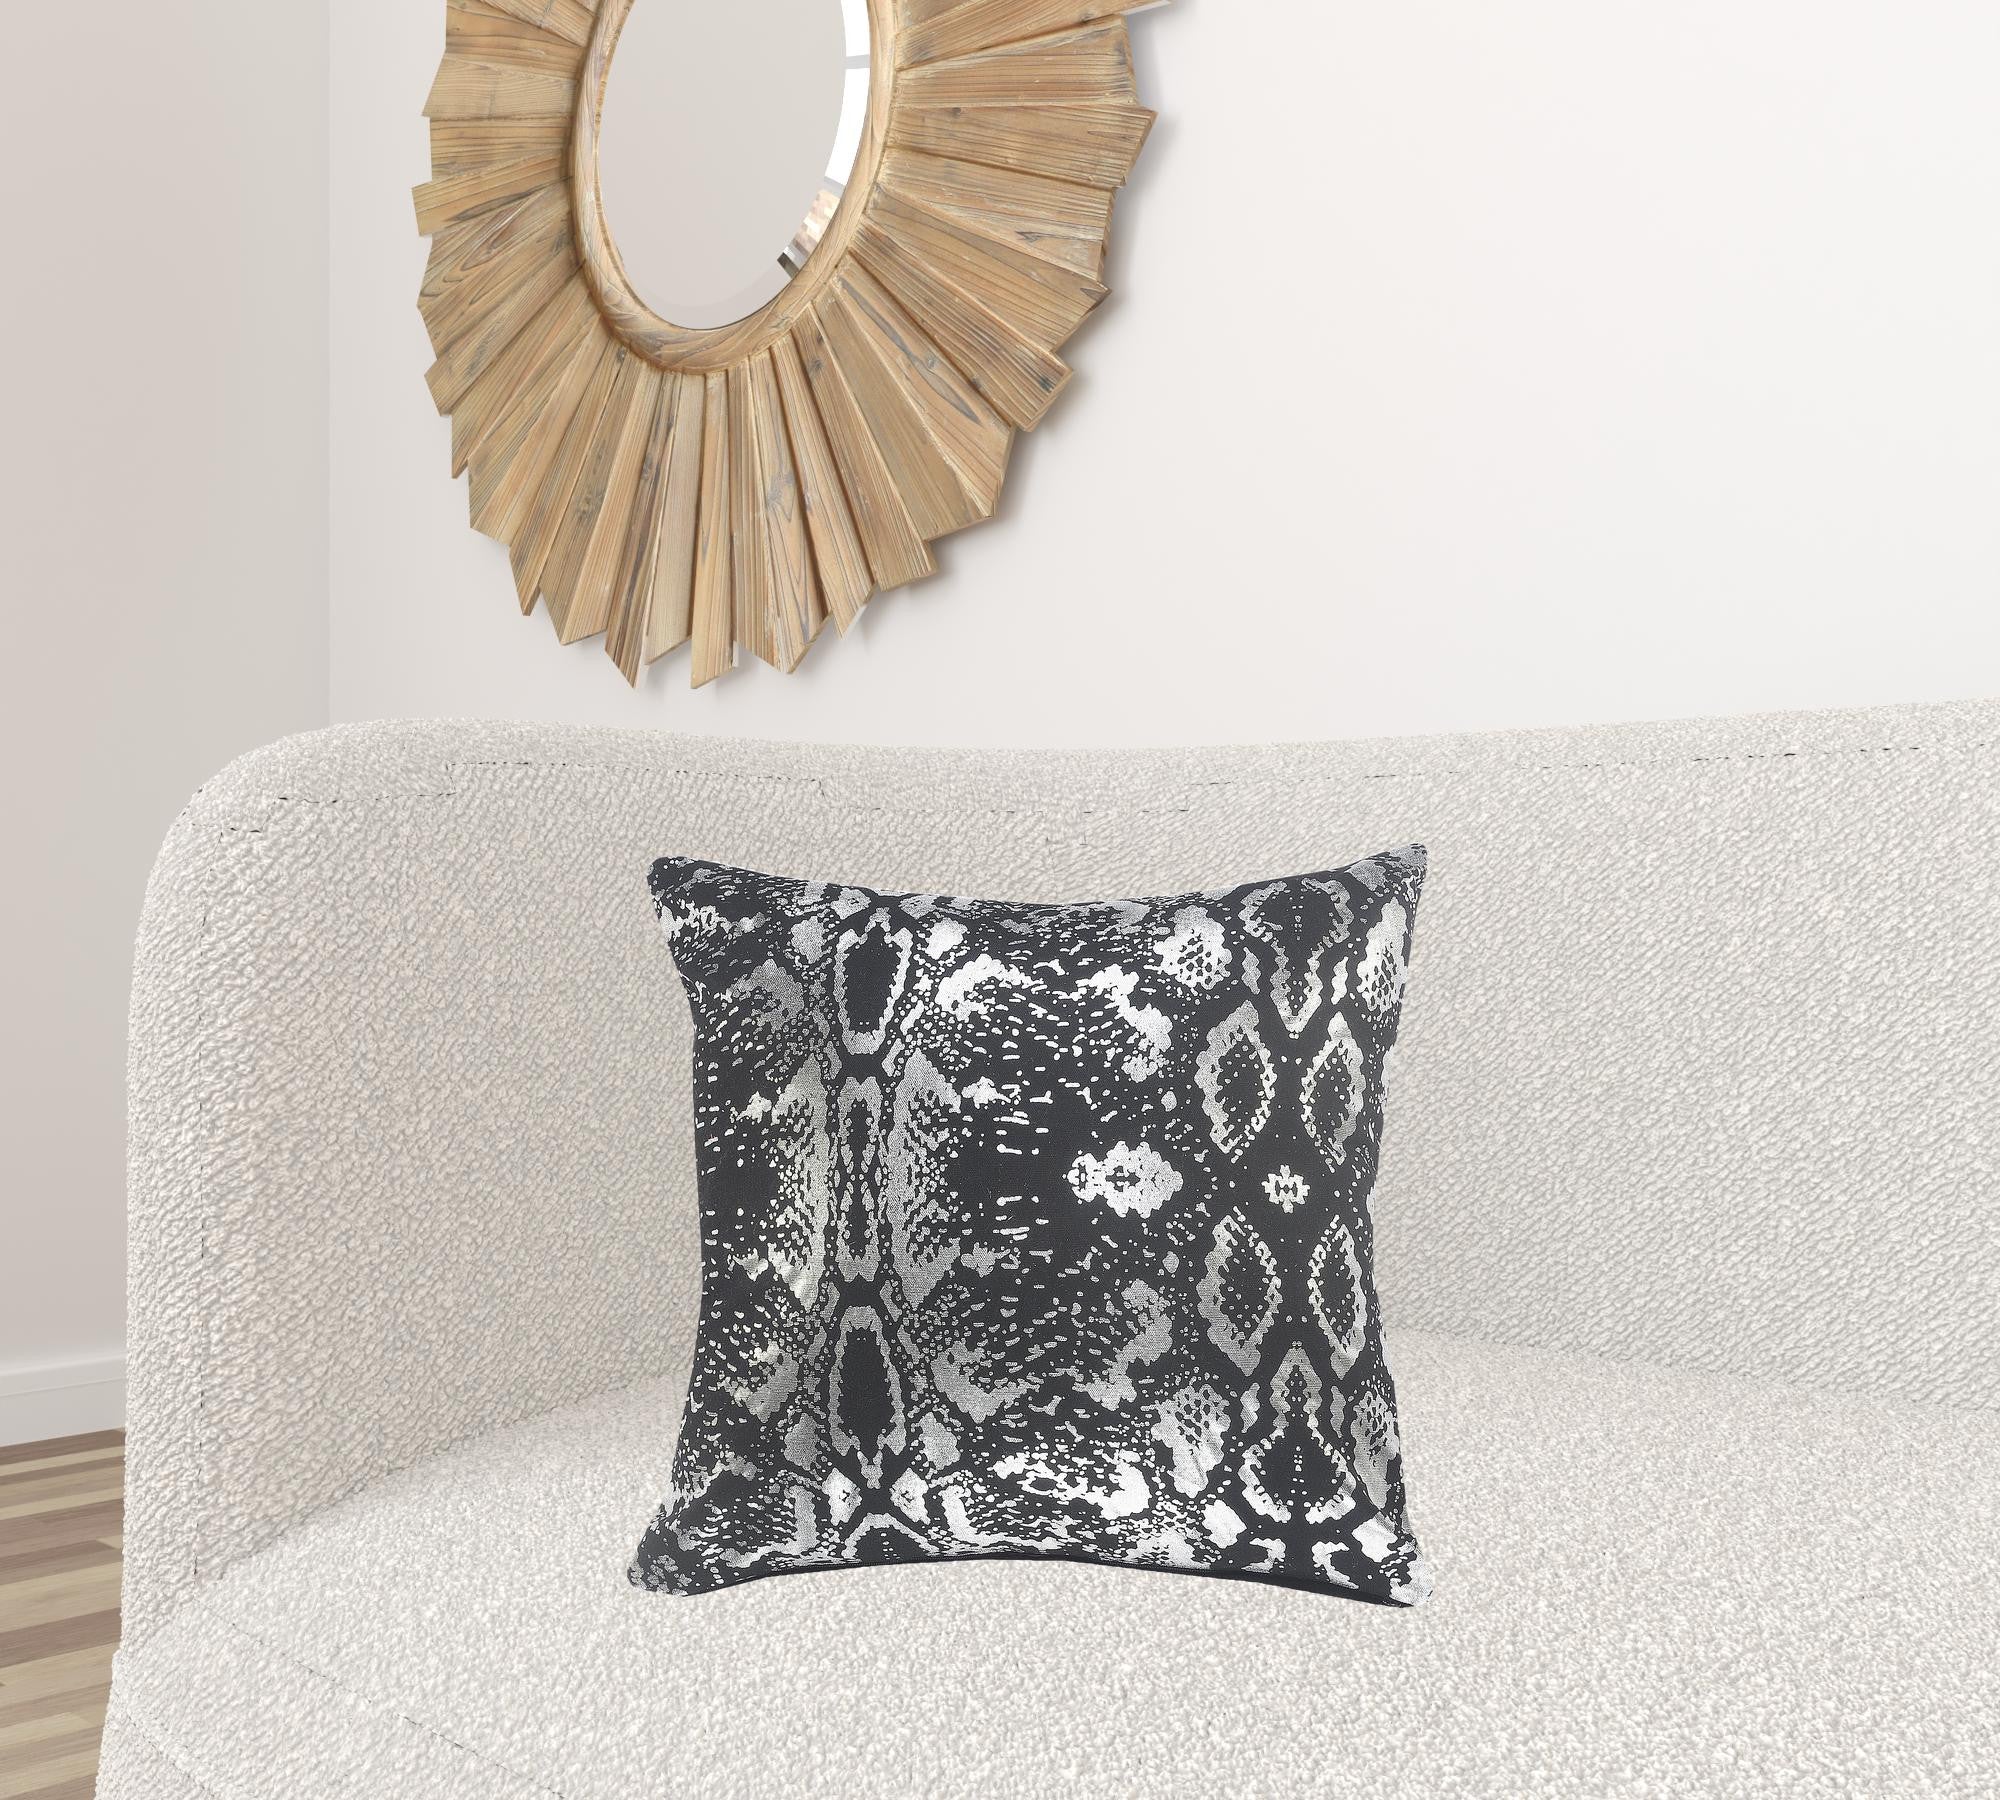 20" X 20" Black And Silver 100% Cotton Animal Print Zippered Pillow